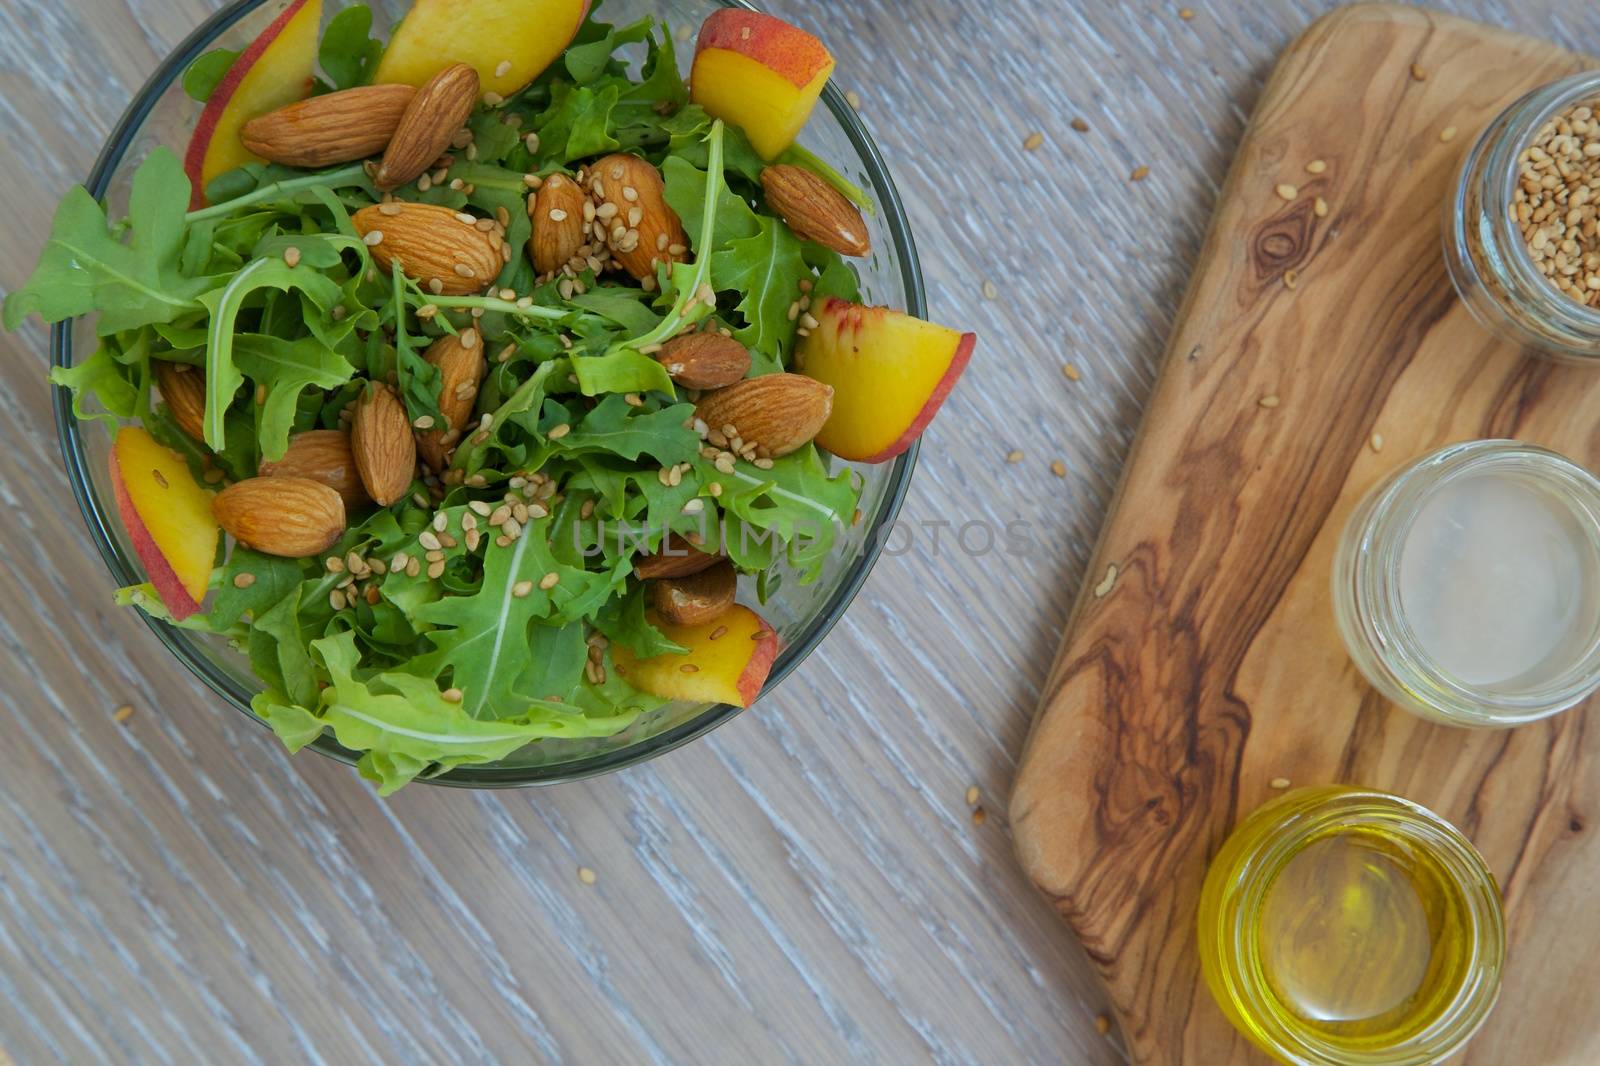 Vitamin salad- rucola with almond, peach and sesame seeds in glass dish. Olive oil, lemon juice and sesame seeds on the wooden cutting board in the background. Close up